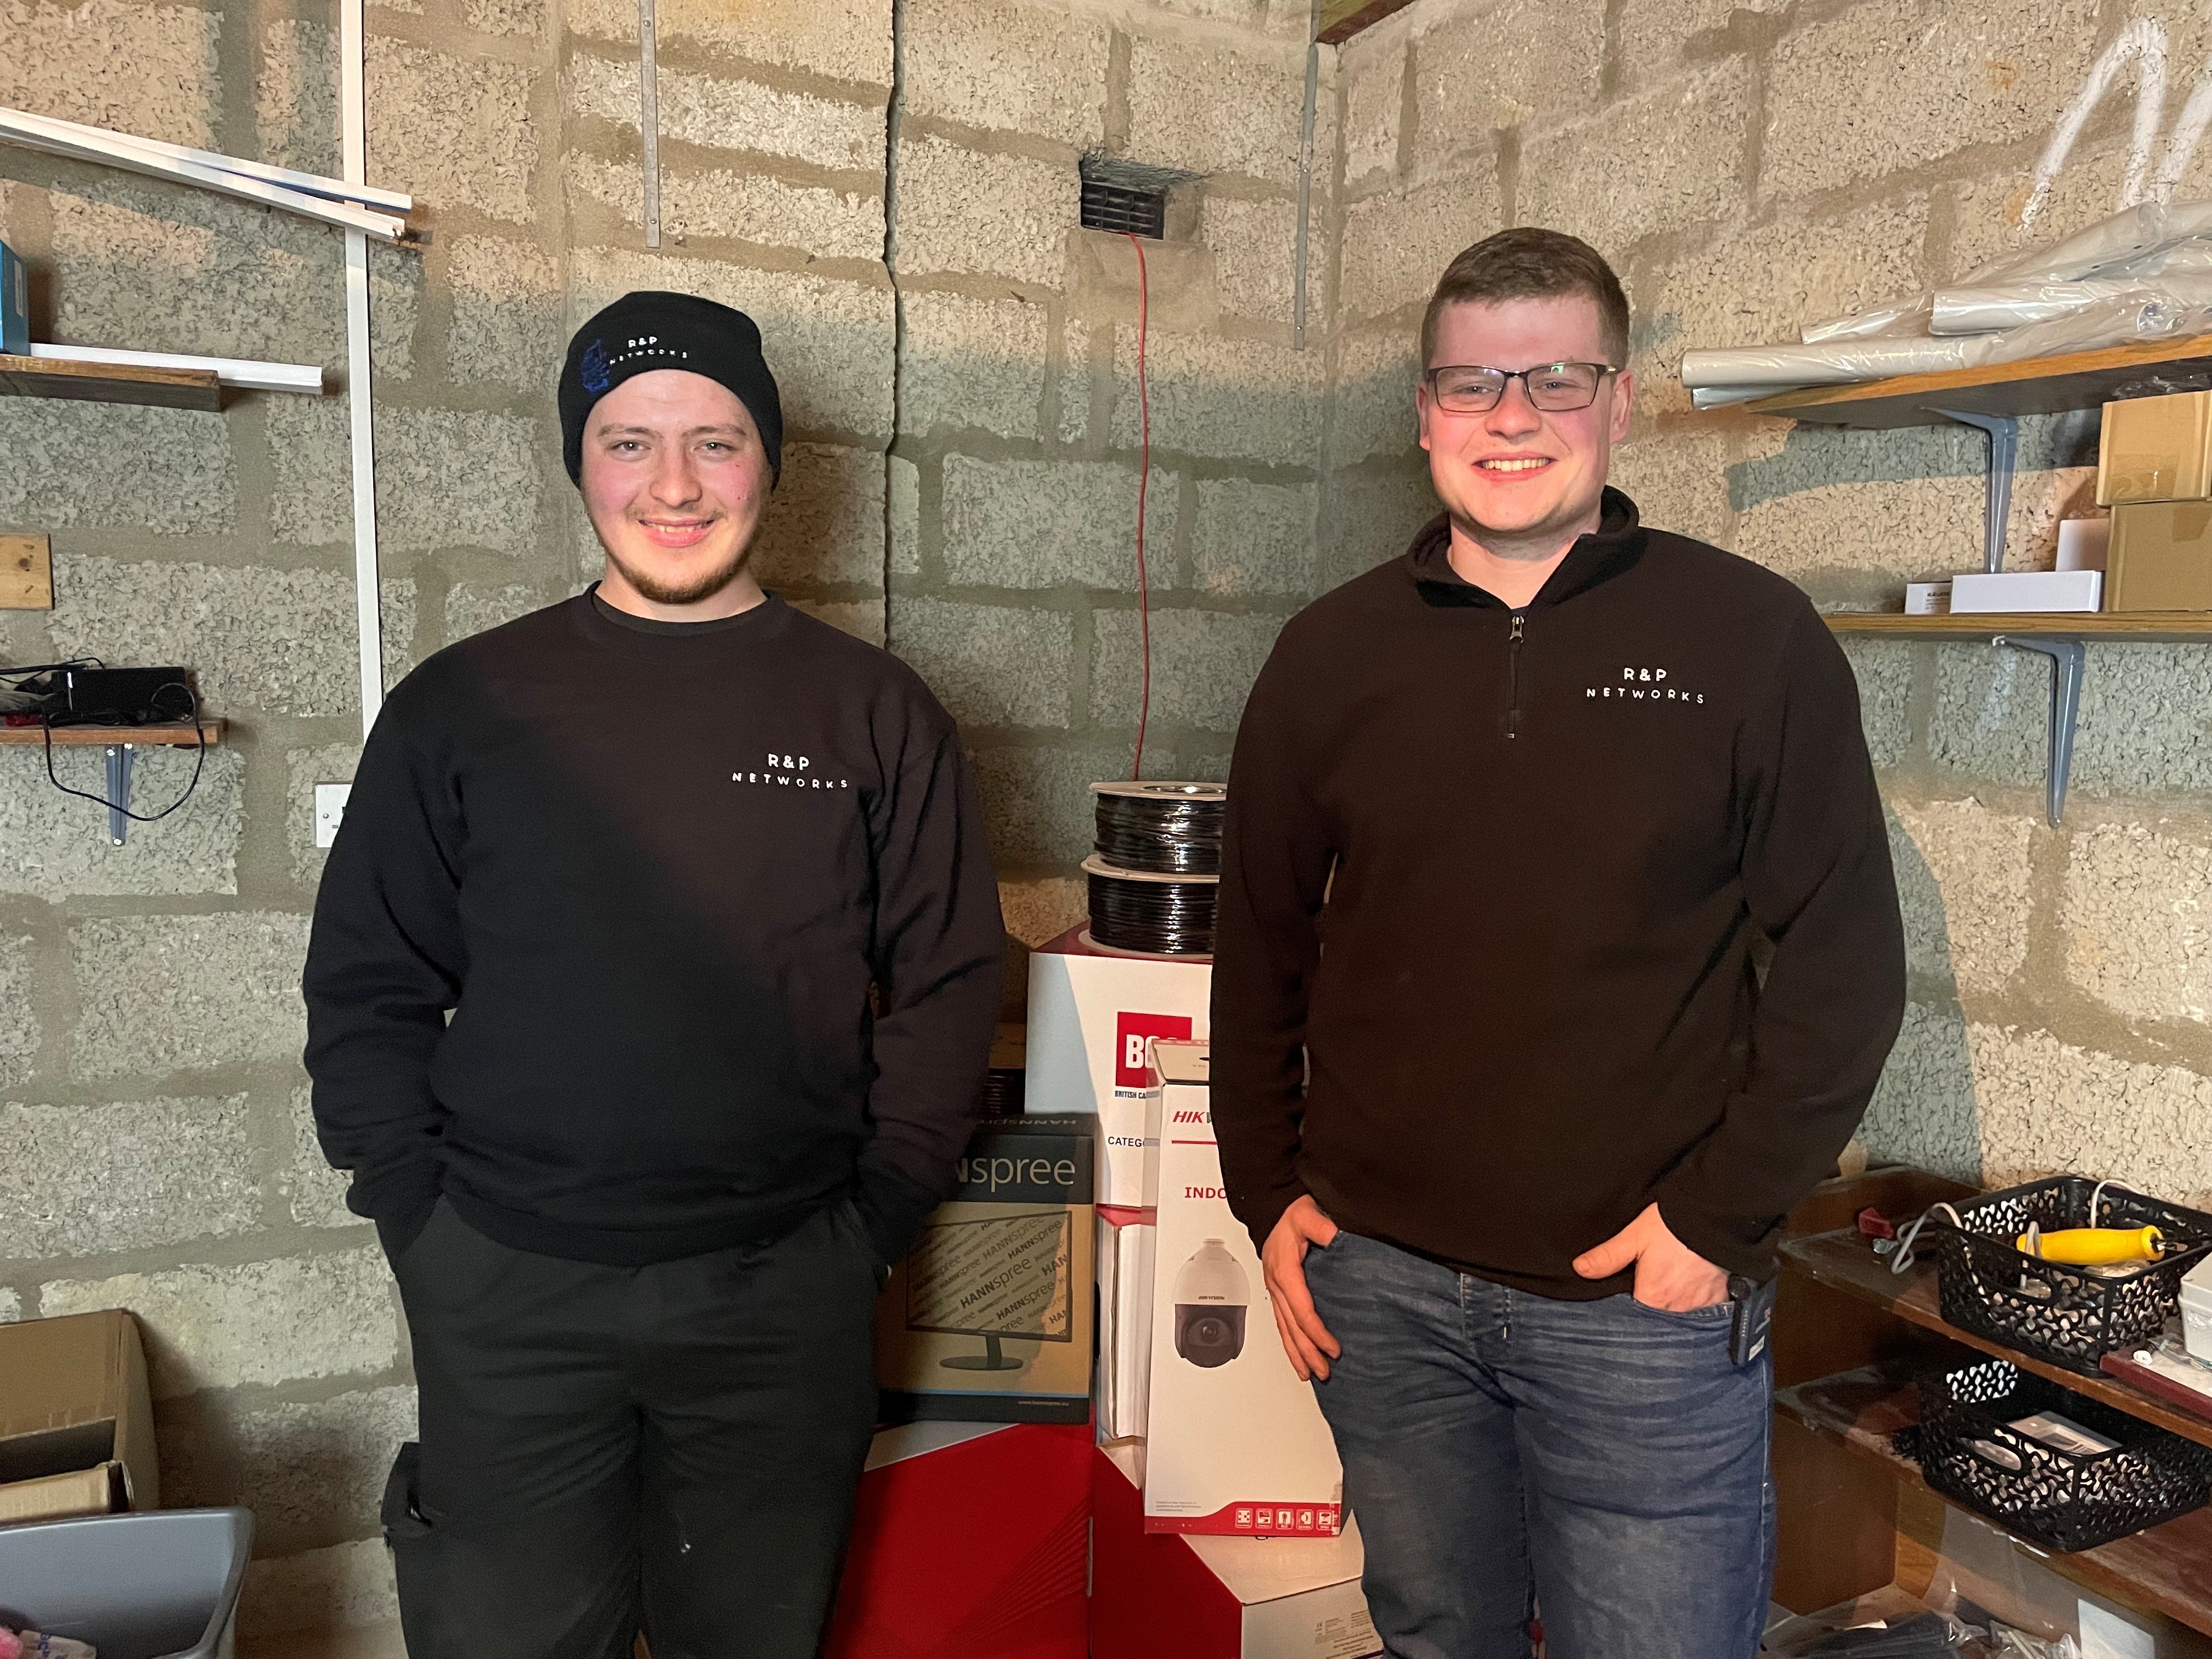 Business Gateway ensures successful start for dynamic young tech duo in Orkney